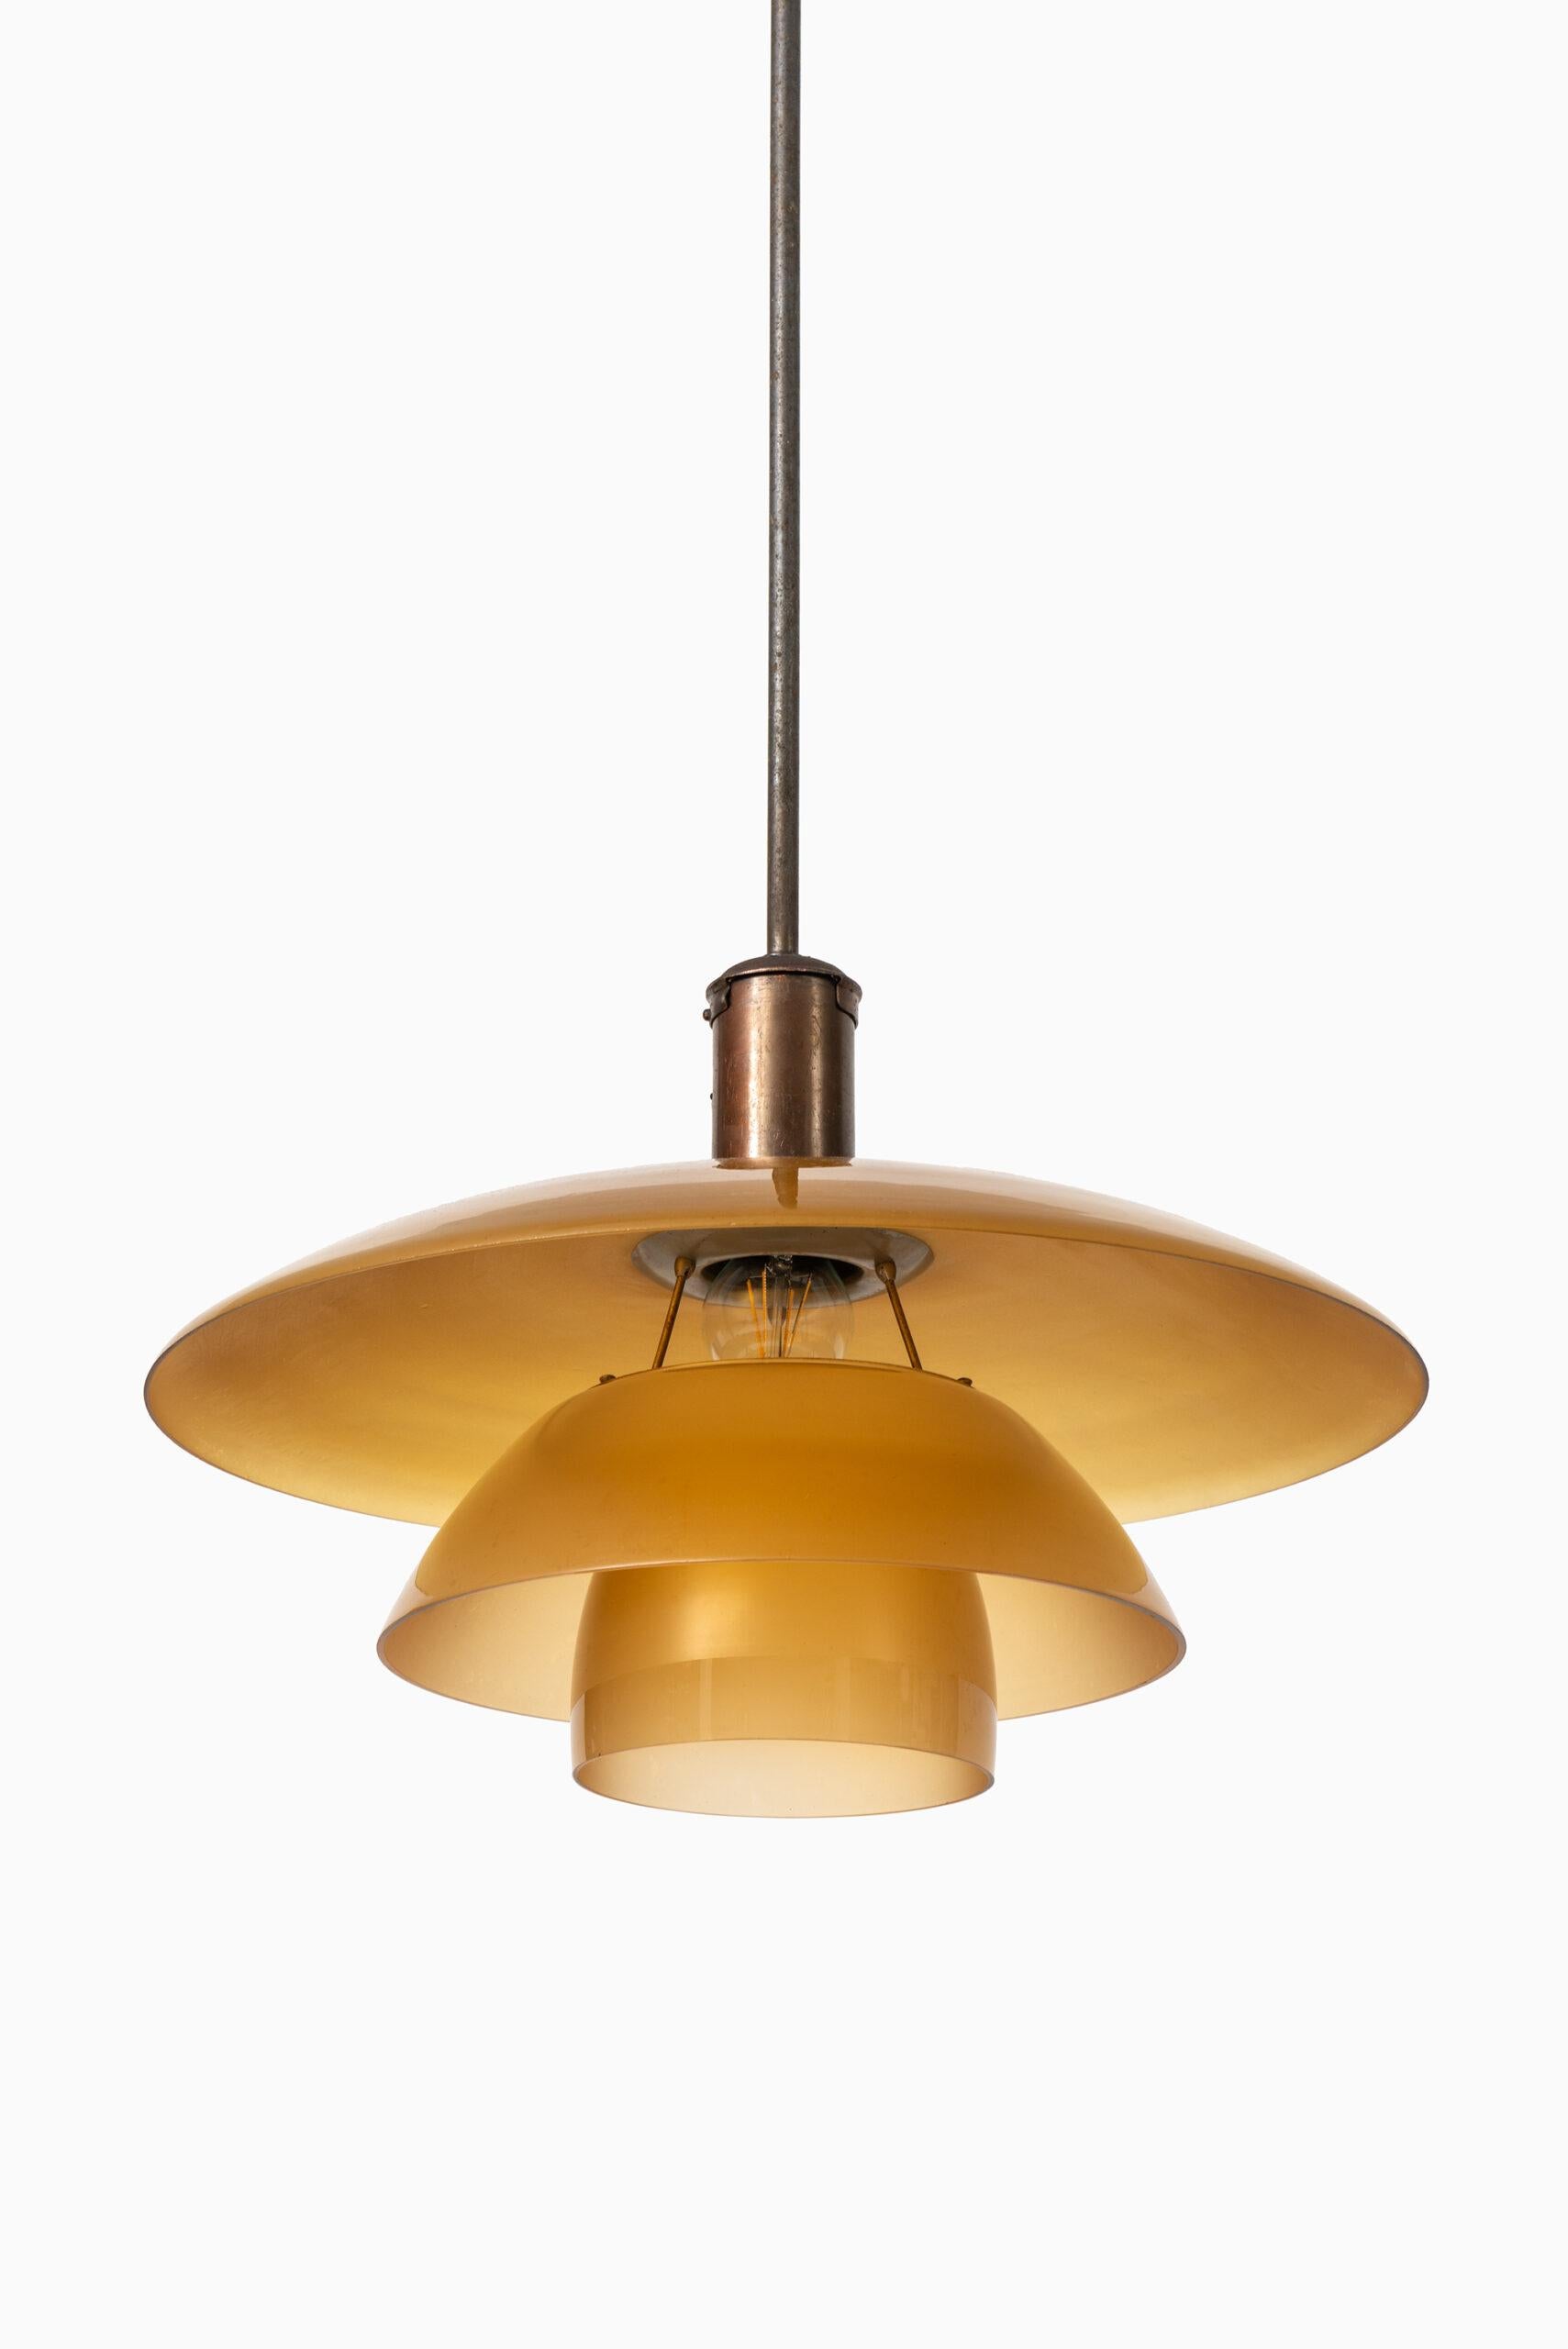 Rare ceiling lamp PH-5/5 designed by Poul Henningsen. Produced by Louis Poulsen in Denmark.